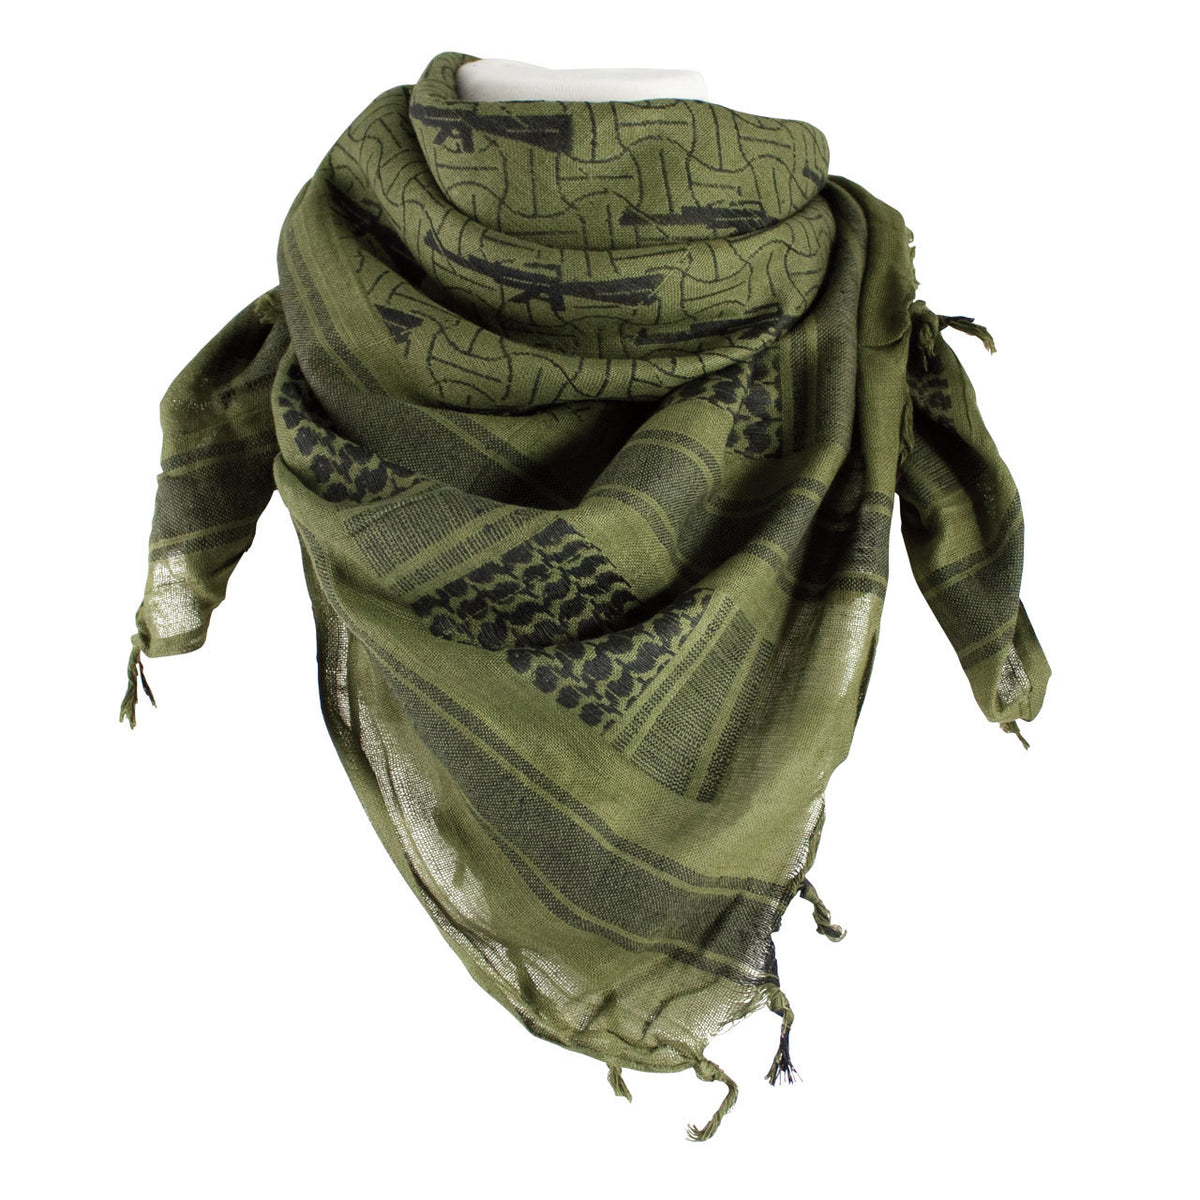 Red Rock Outdoor Gear Shemagh Head Wraps